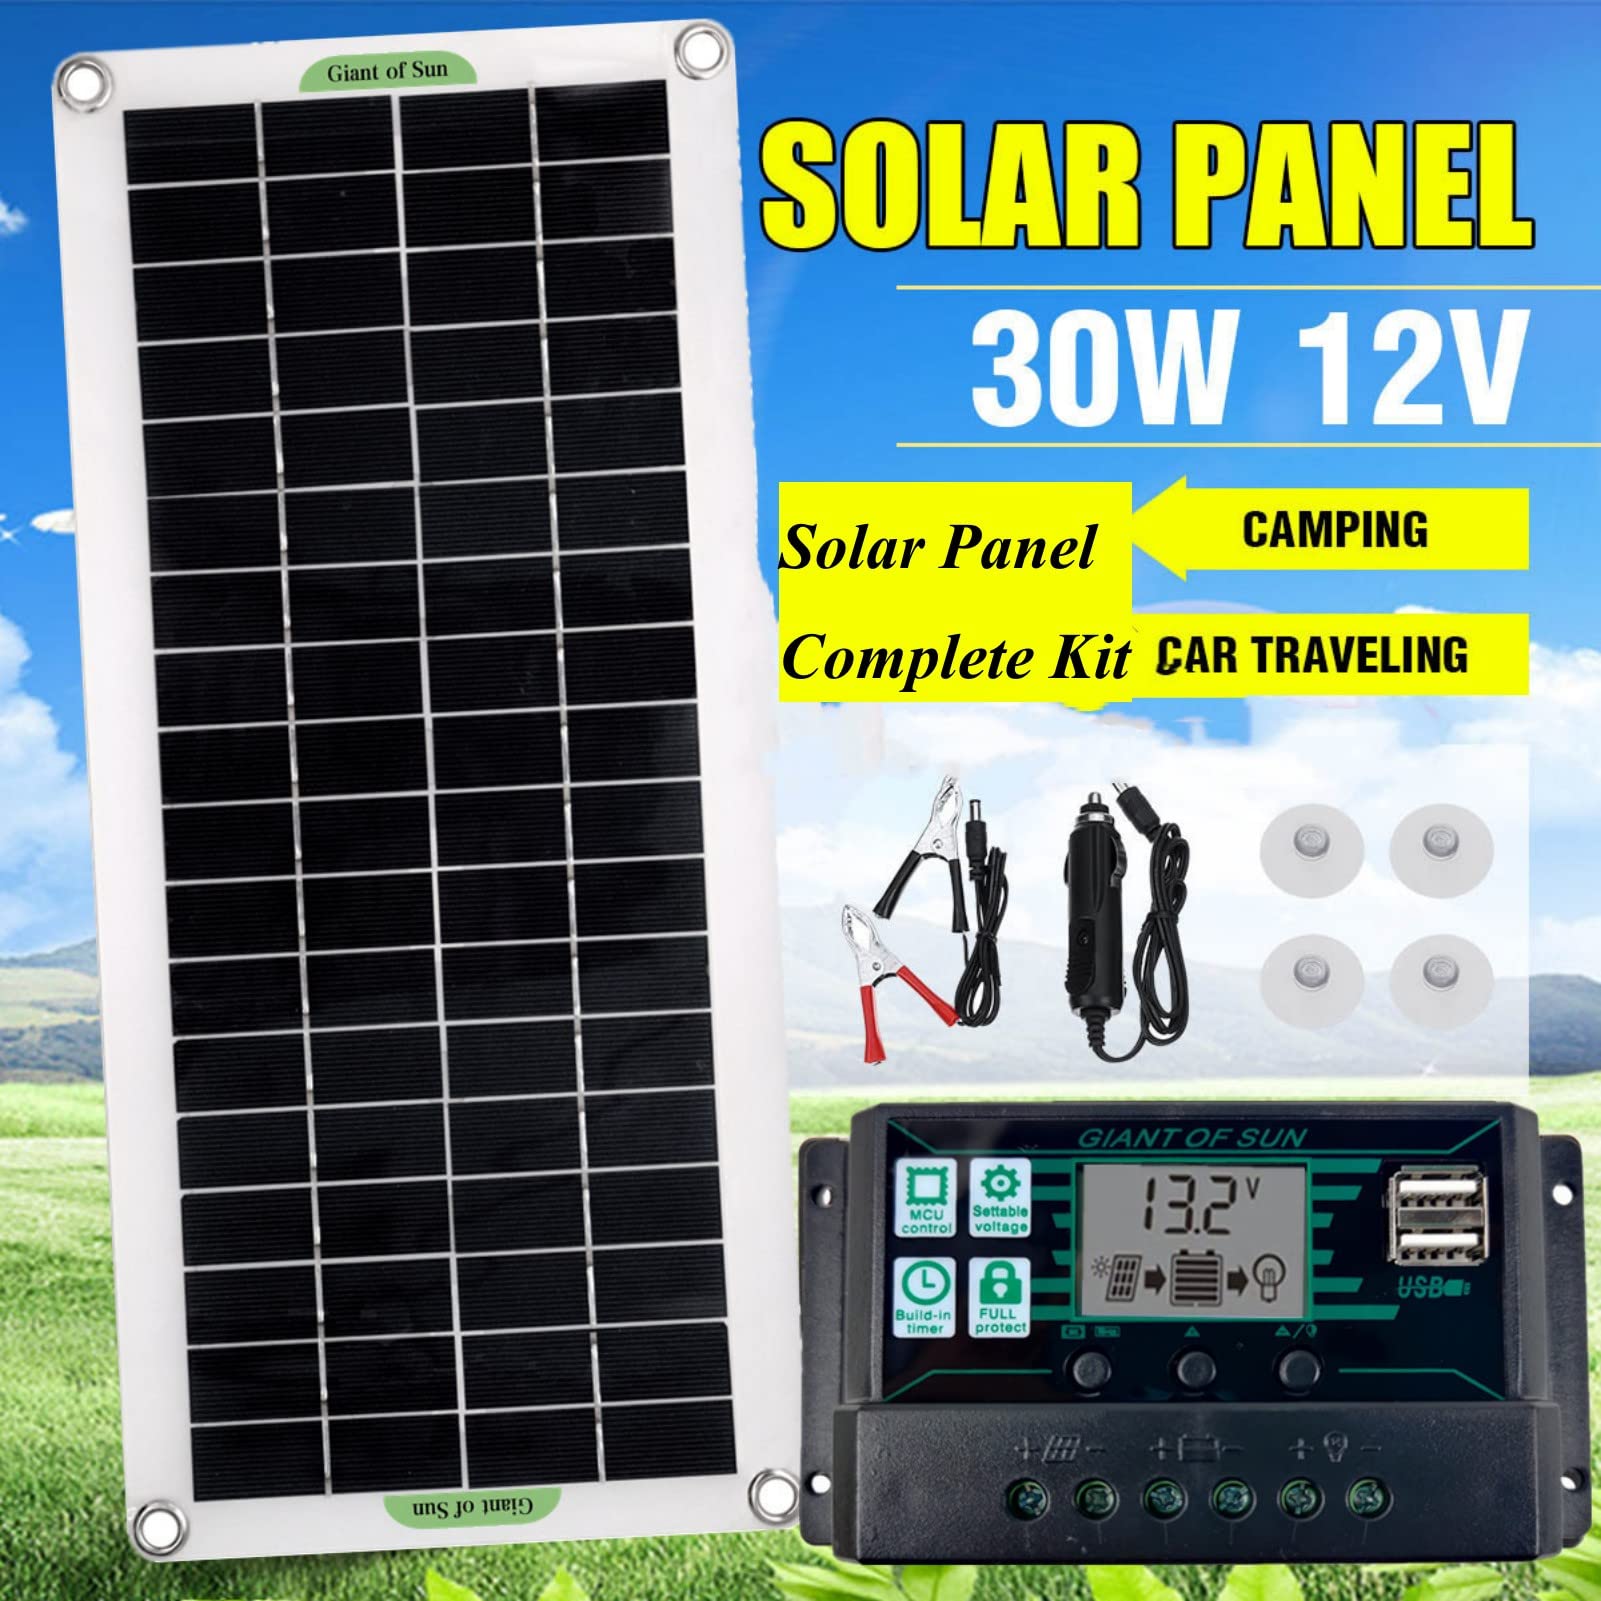 Cryfokt 30W 12V 24V Solar Panel Kit, Solar Panel Maintainer with Voltage Controller and SAE Cable Adapters, Solar Battery for Car, RV, Boat, Marine, Trailer